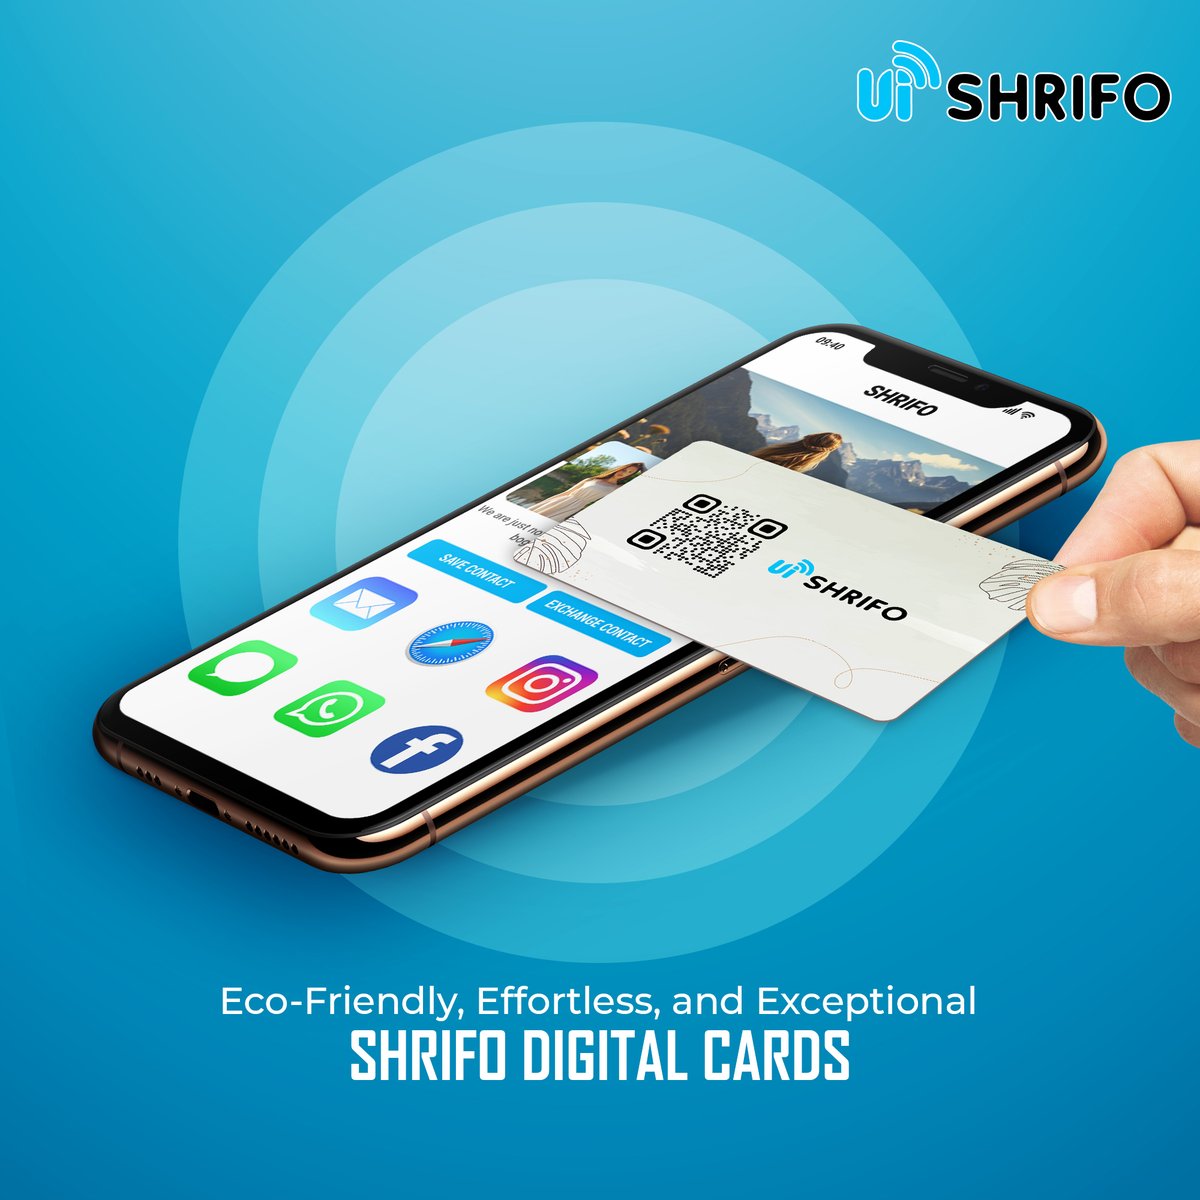 Experience the pinnacle of sustainability and convenience with Shrifo Digital Cards.

#EffortiessExperience #digitalidentity #smartbusinesscard #bestbusinesscards #contactlesscard #digitalbusinesscard #nfebusinesscard #nfctechnology #businesscard #networking